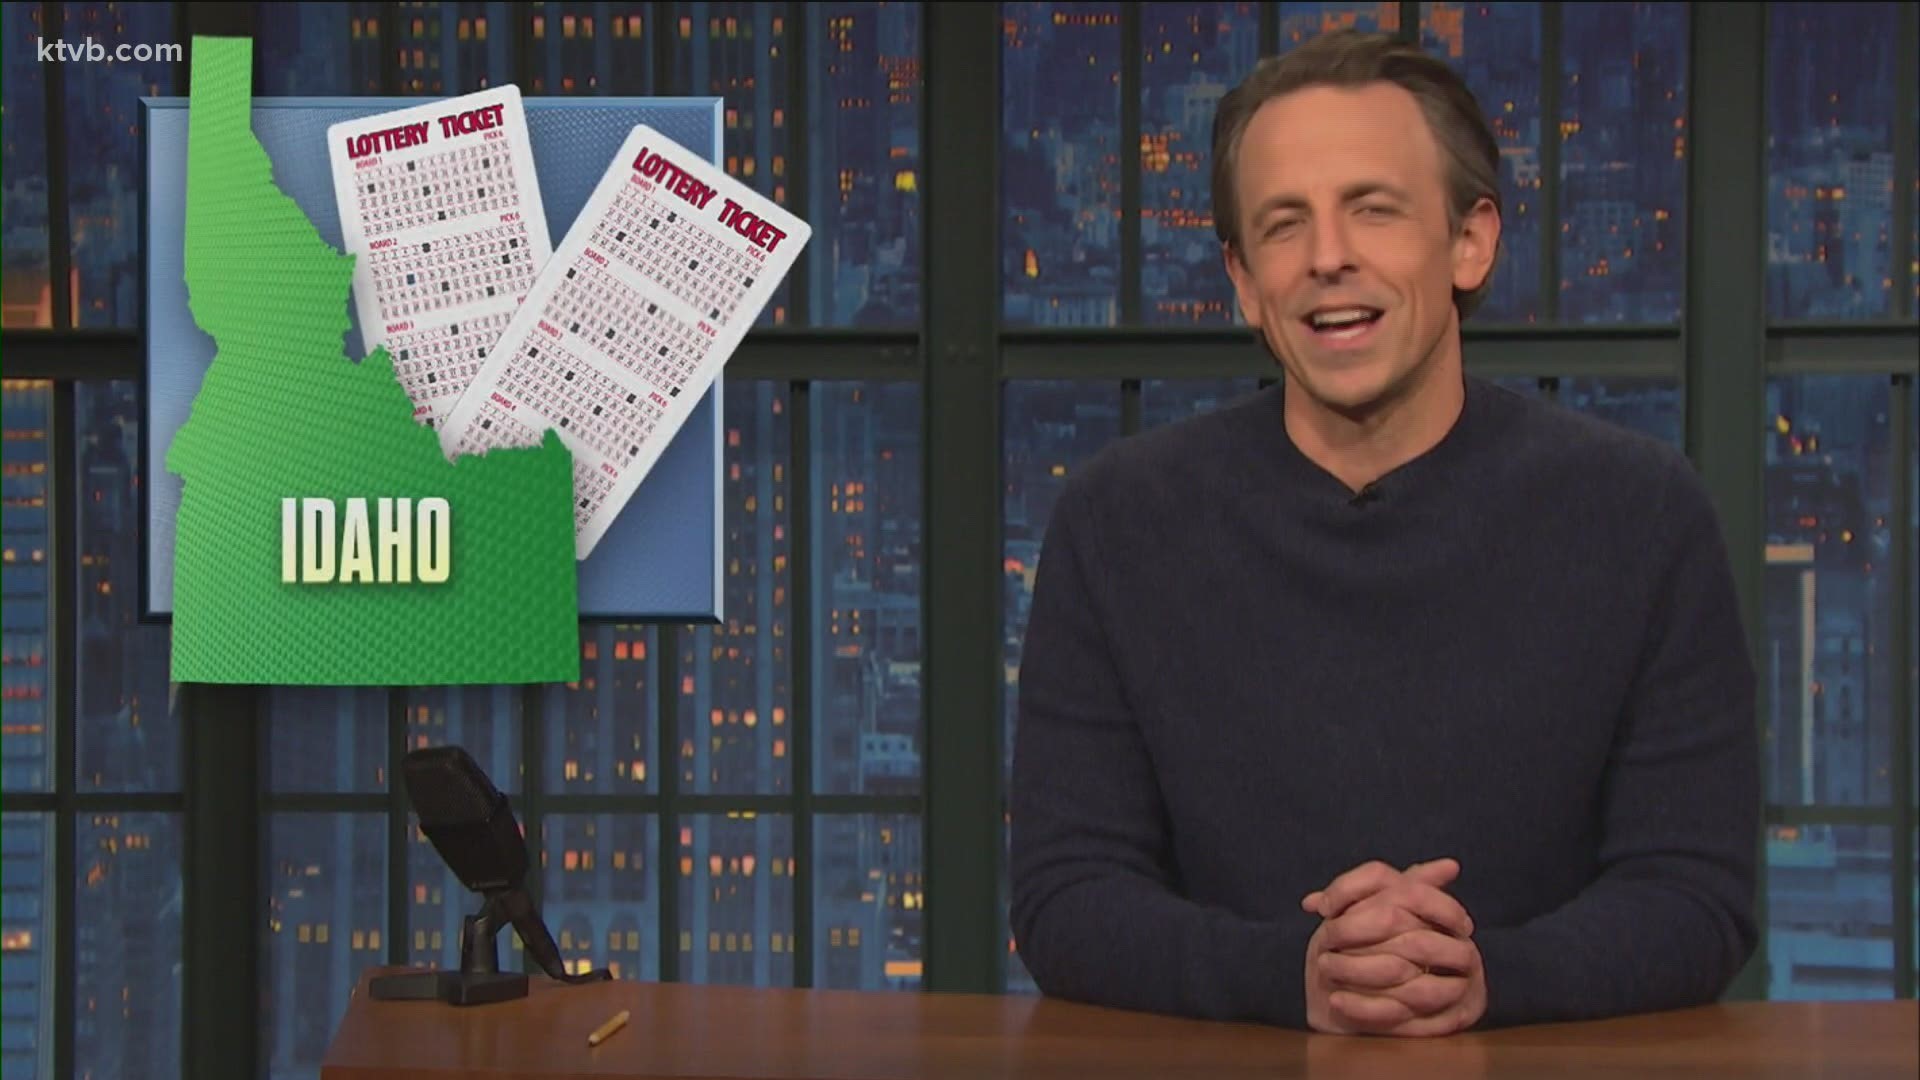 Jimmy Fallon and Seth Meyers each found humor in a story about an Idaho man who won the lottery for the sixth time.